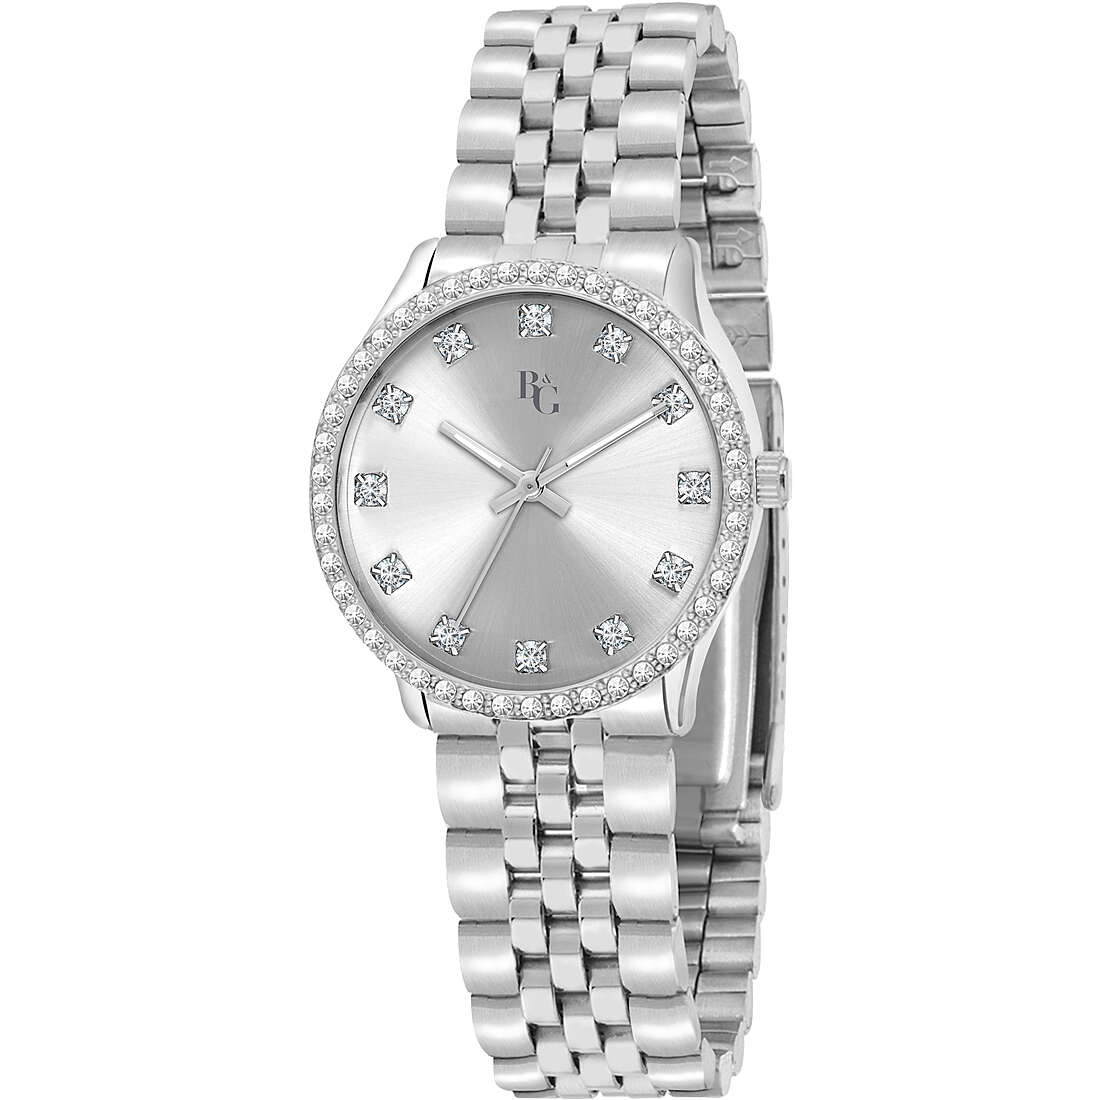 only time watch Metal Silver dial woman Luxury R3853241520